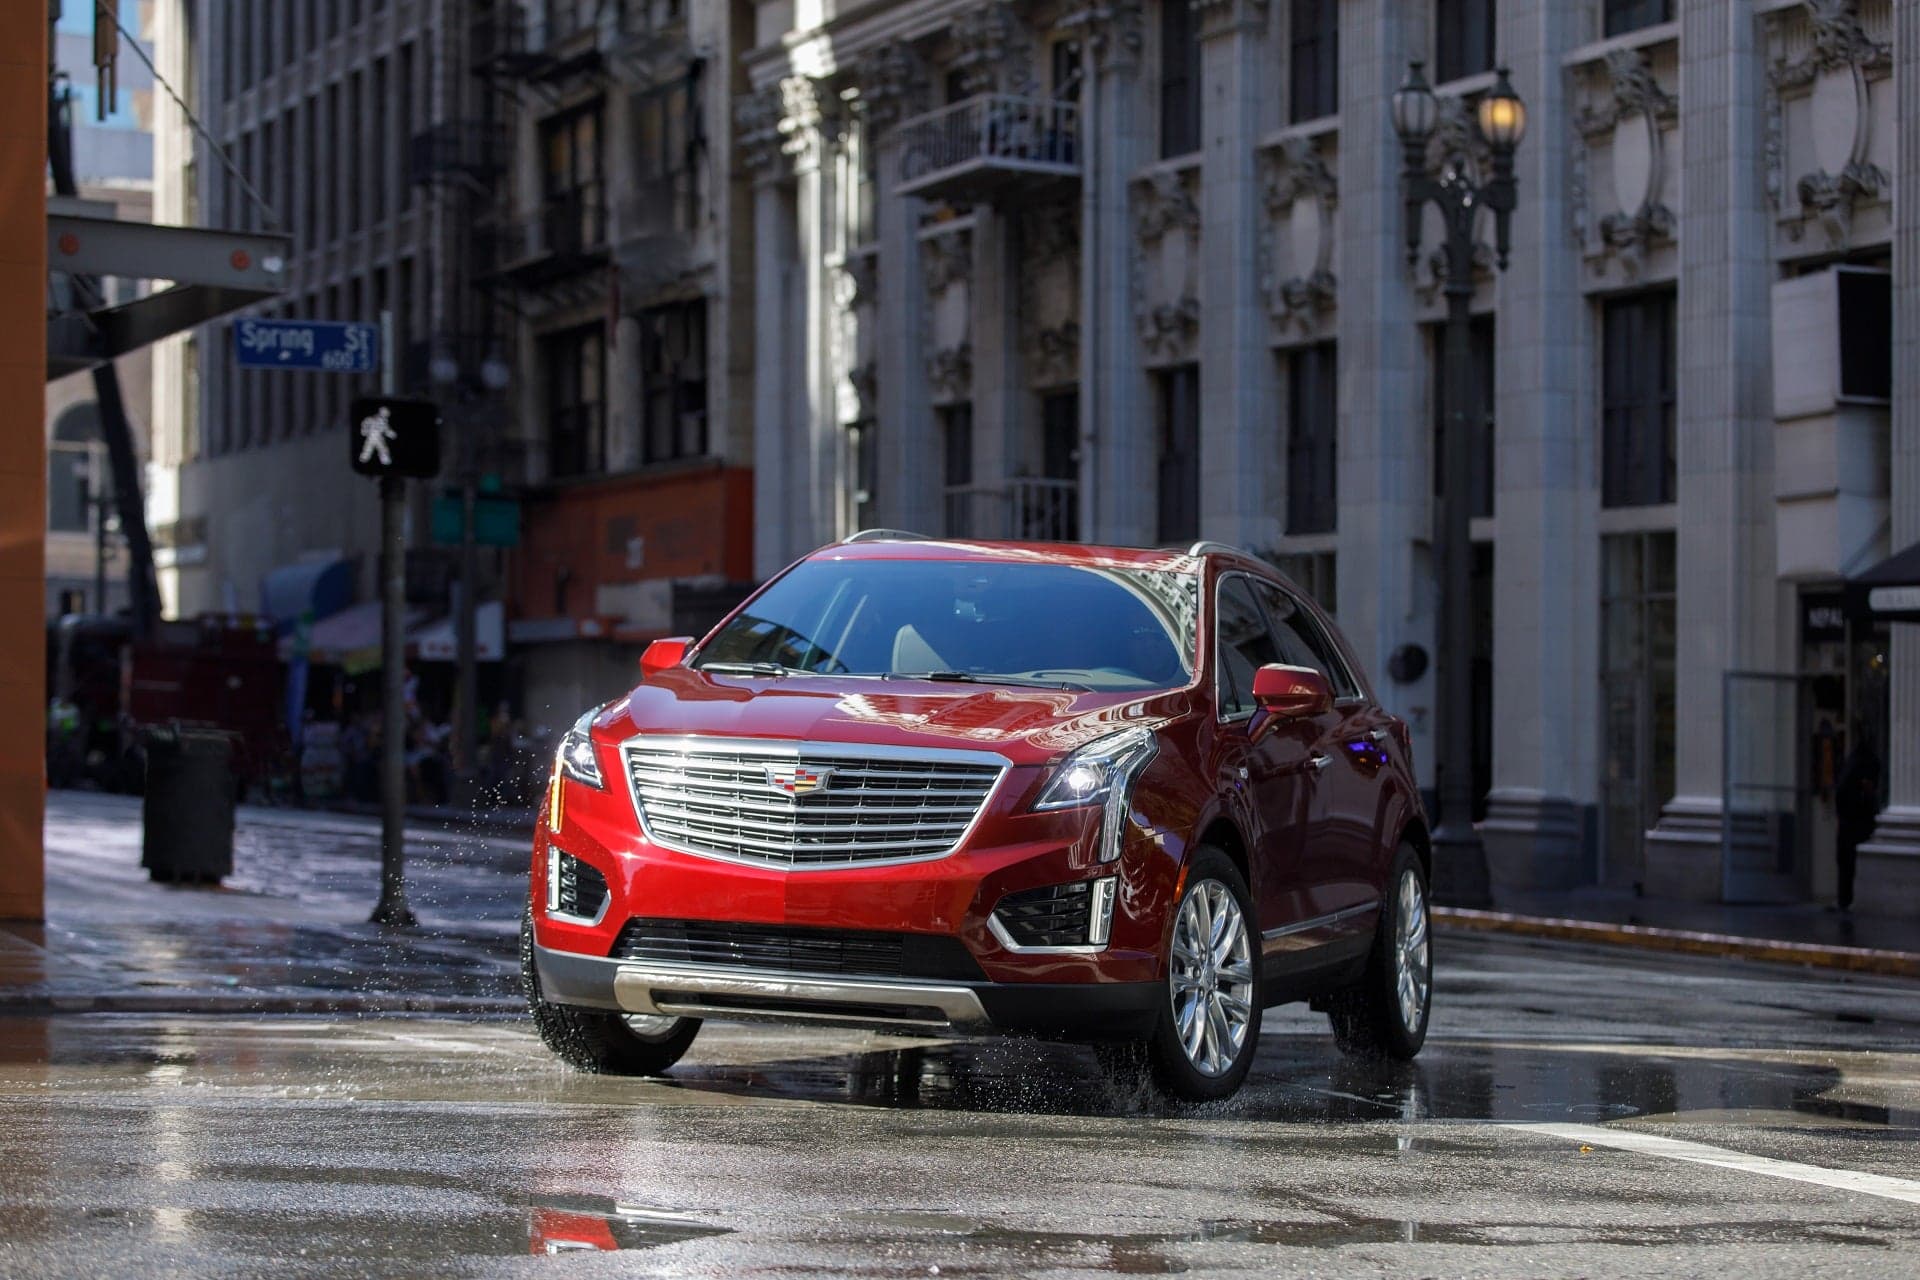 Cadillac Reports Second Best Sales Year Ever in 2017